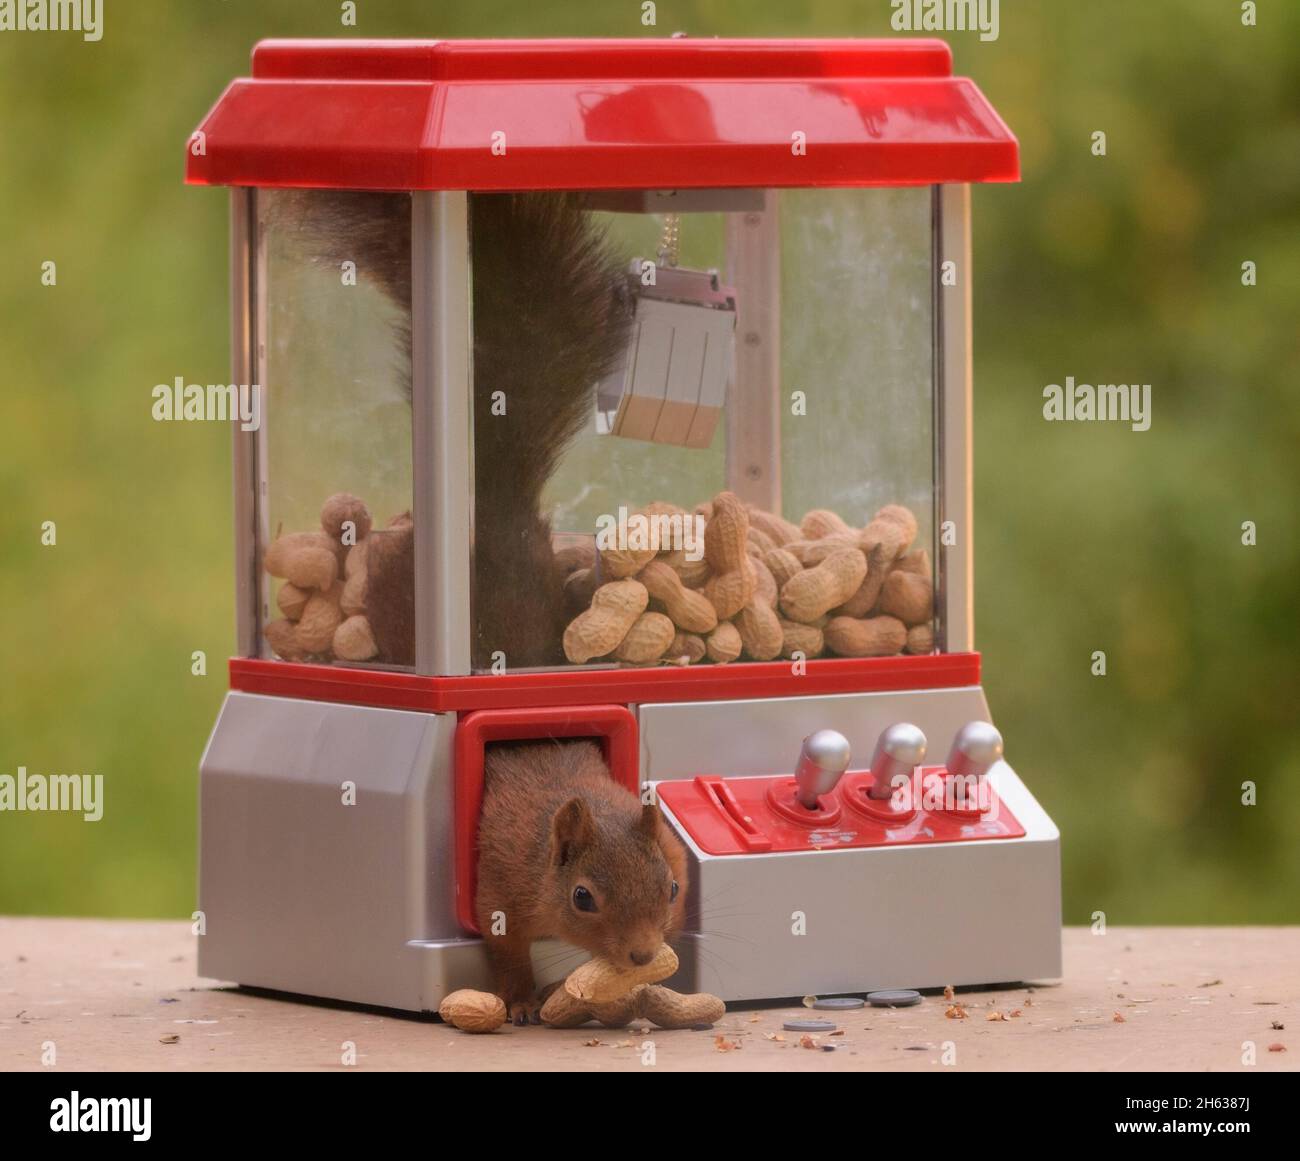 red squirrel climbing out a gumball machine Stock Photo